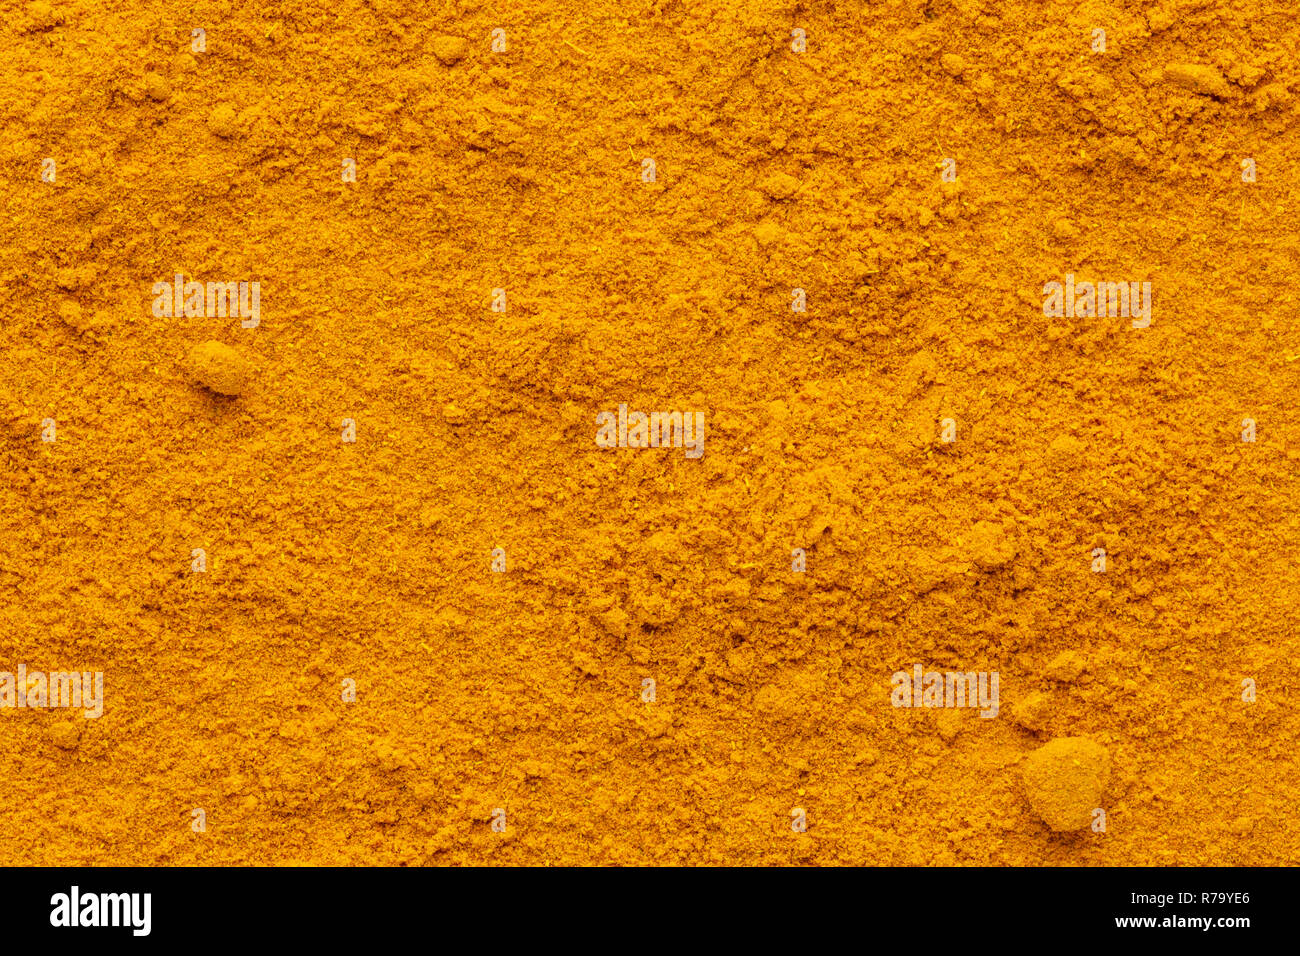 Curry powder ground full frame image background with rough surface, view directly from above. Stock Photo